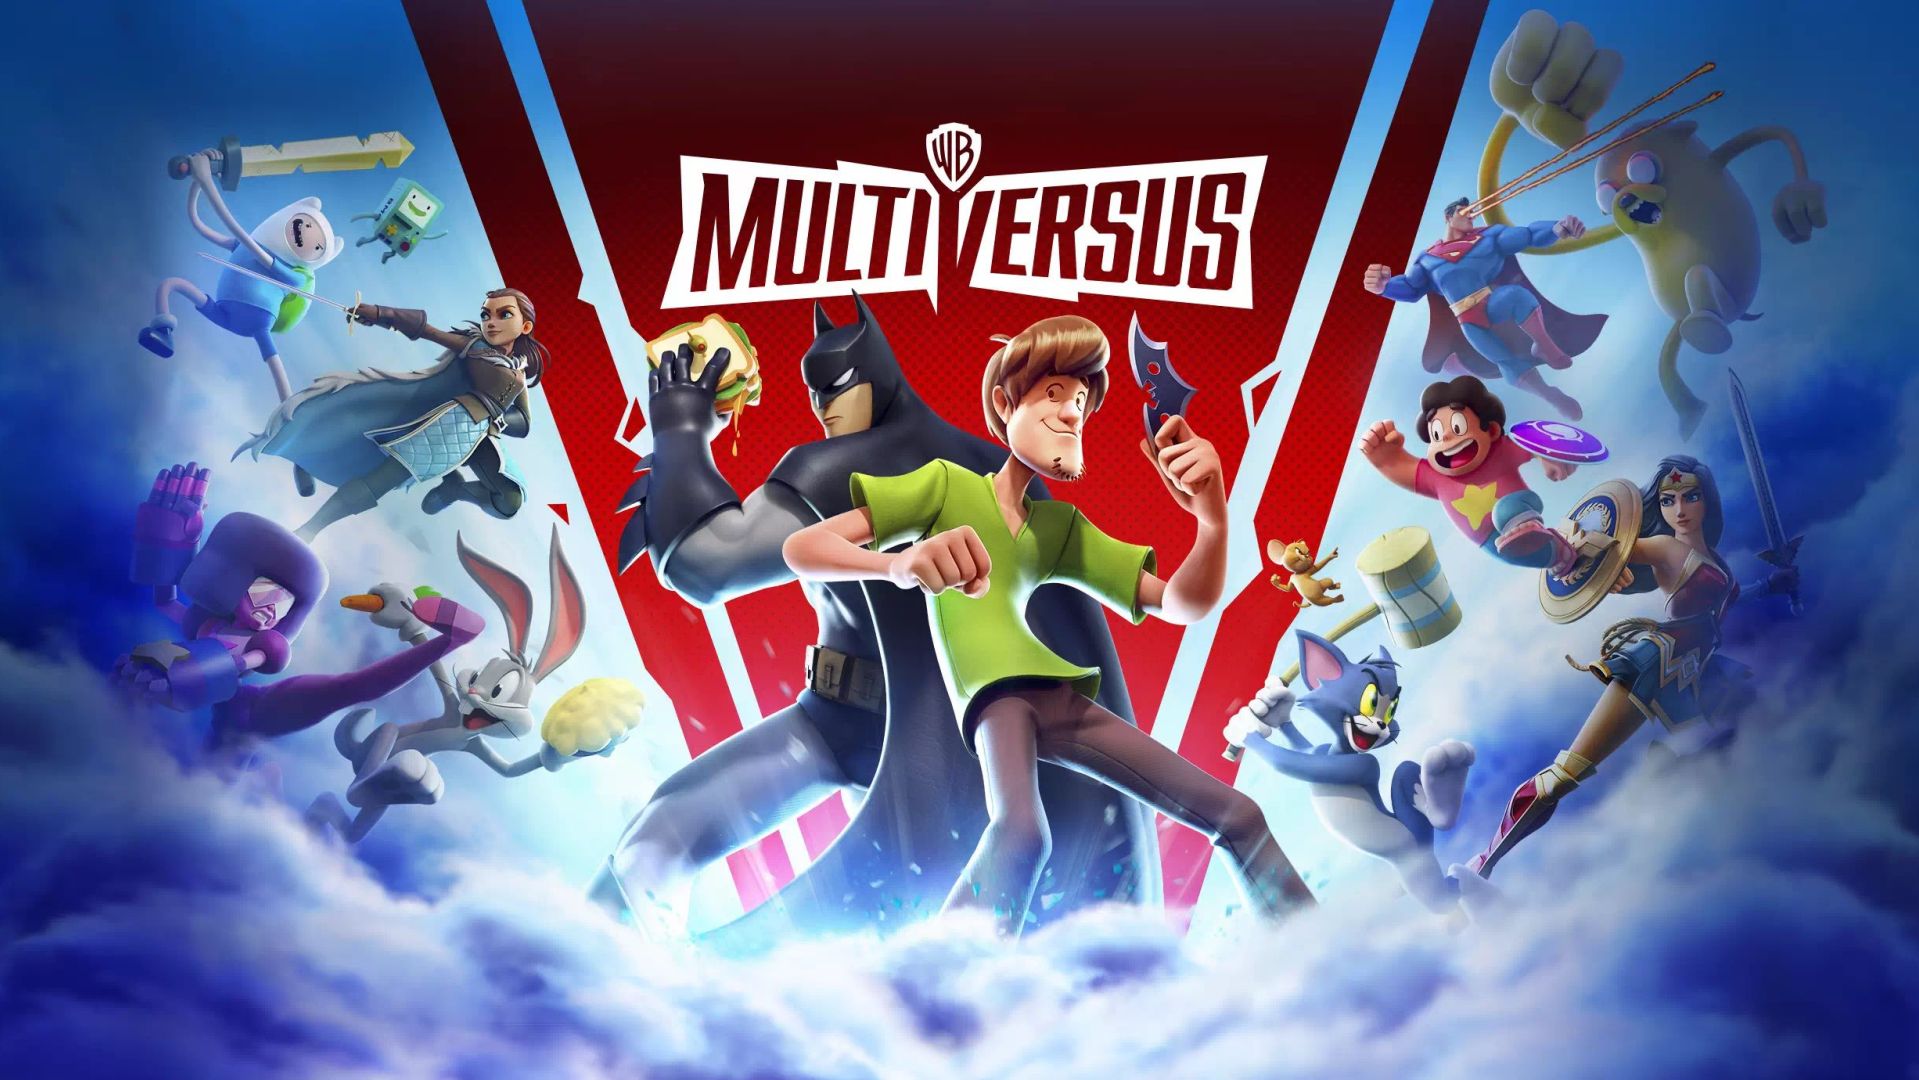 The full release of MultiVersus will take place on 28 May